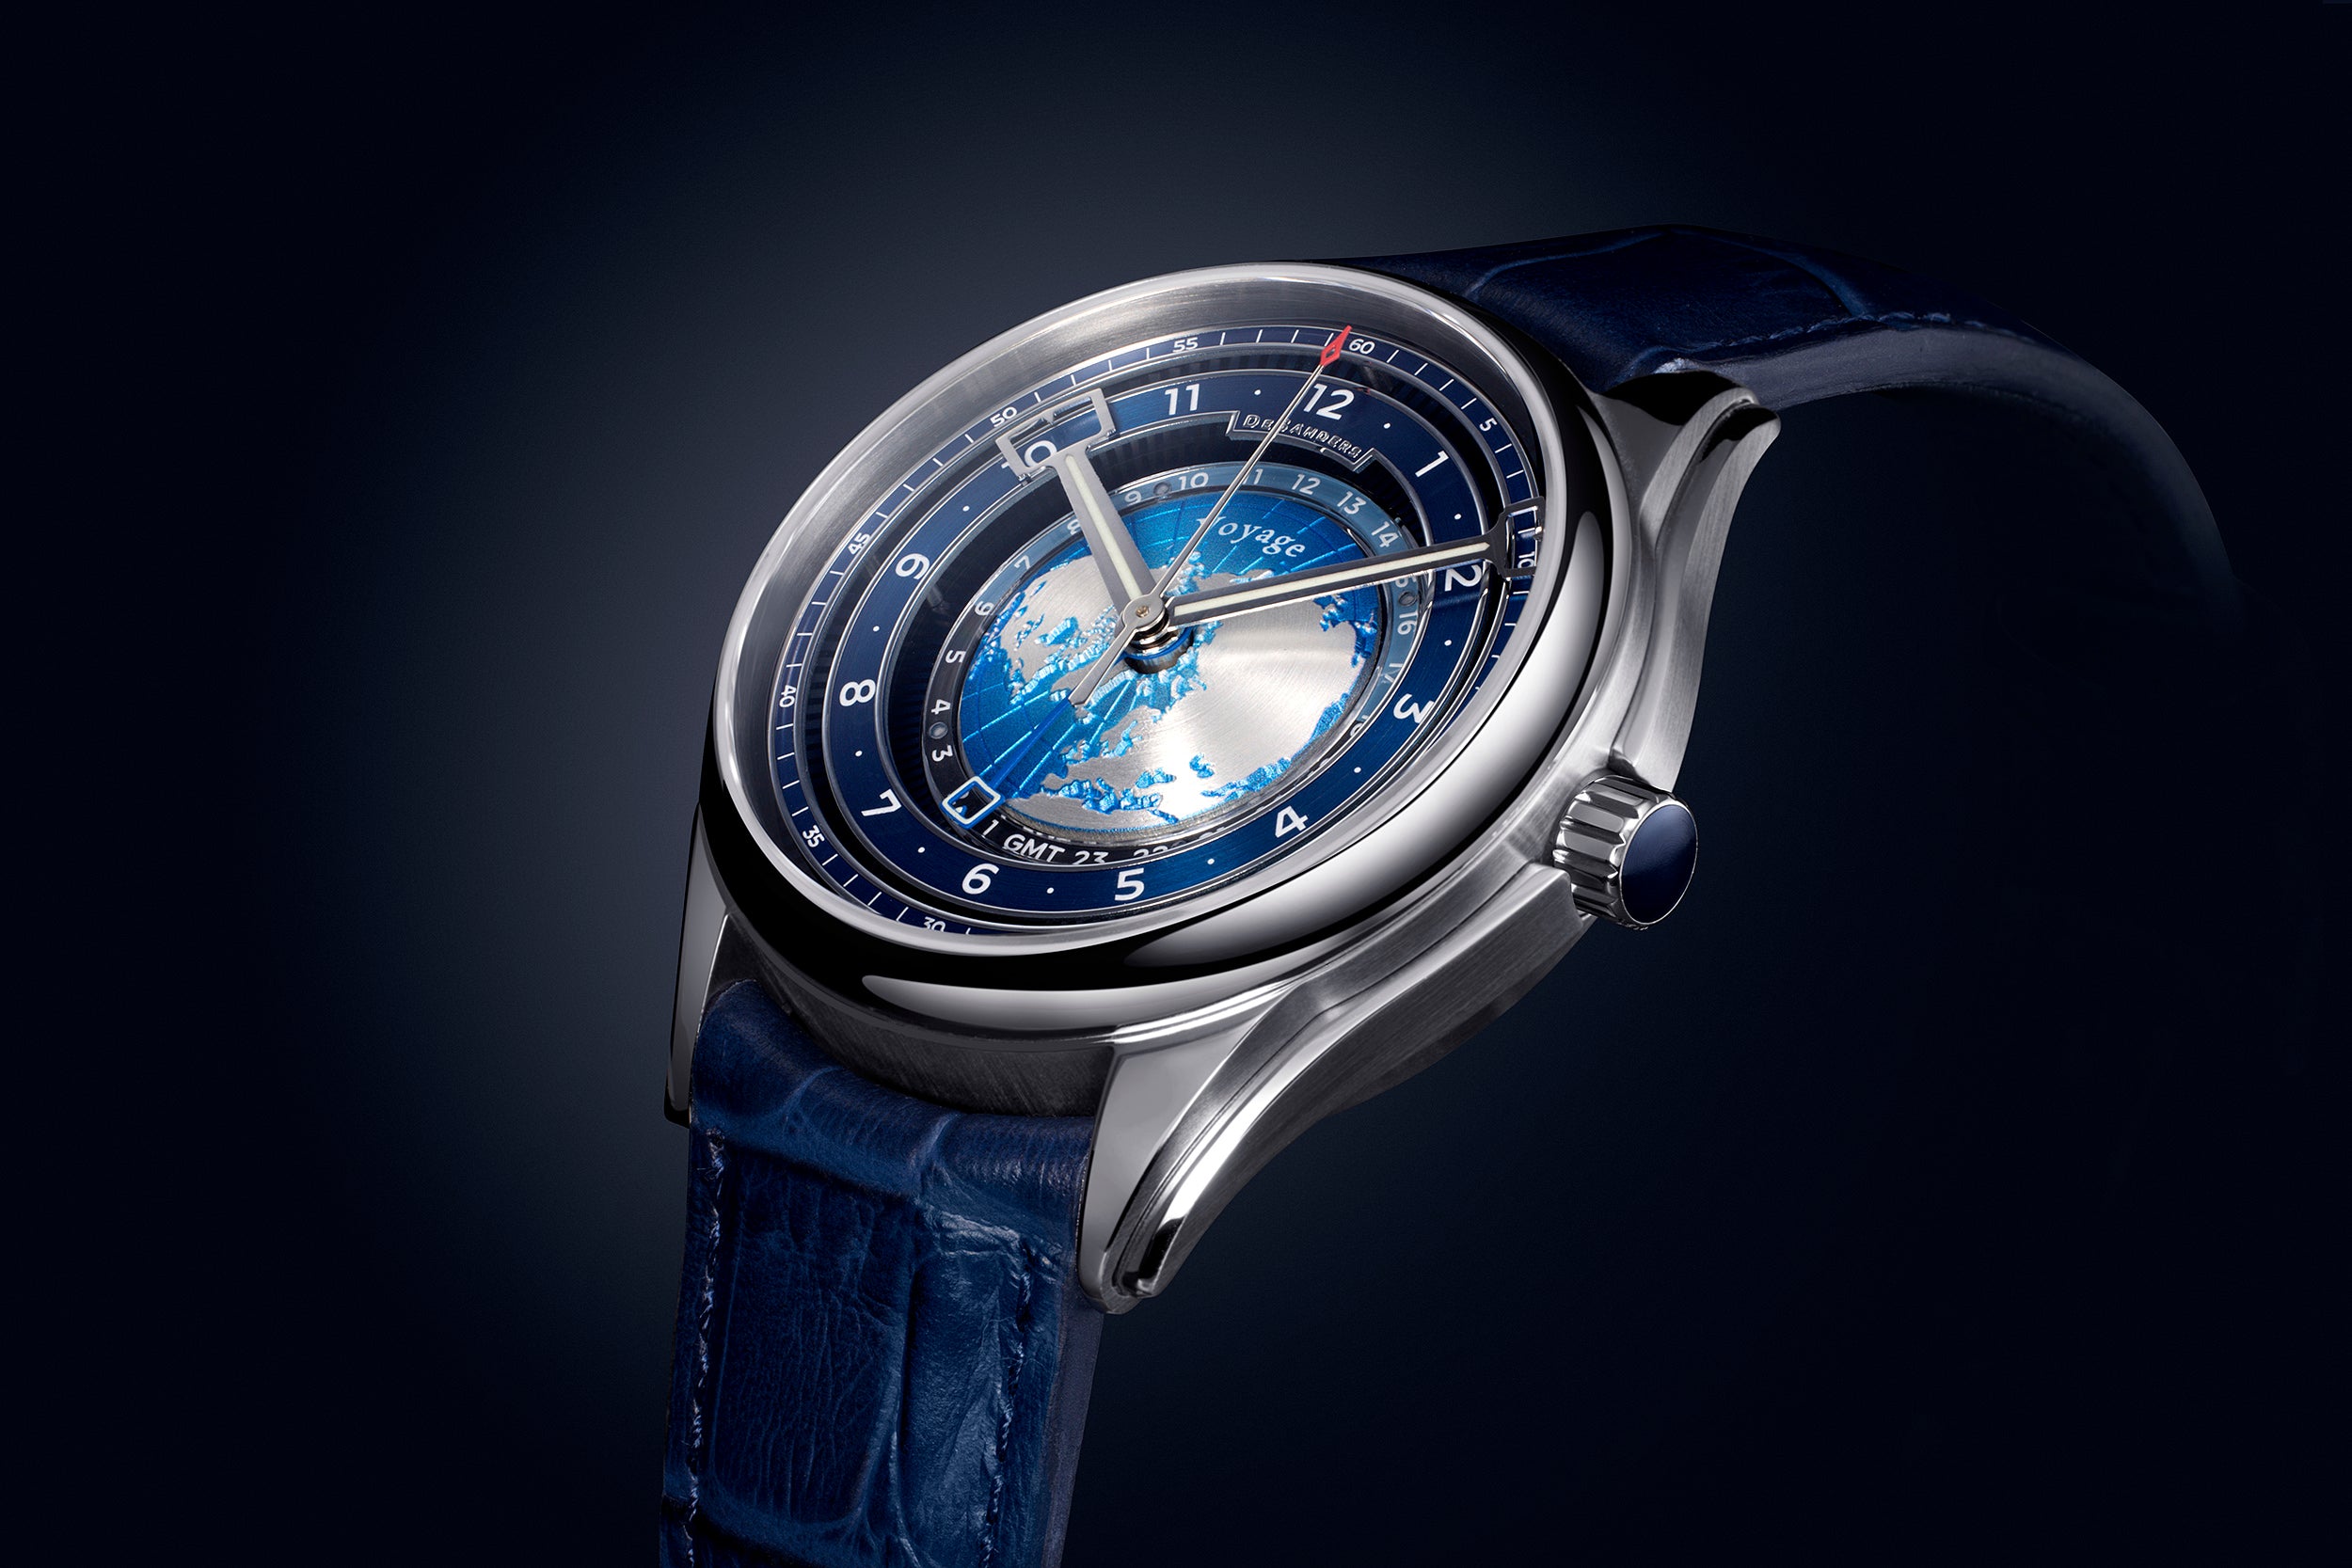 Voyage GMT - Stainless steel & Blue